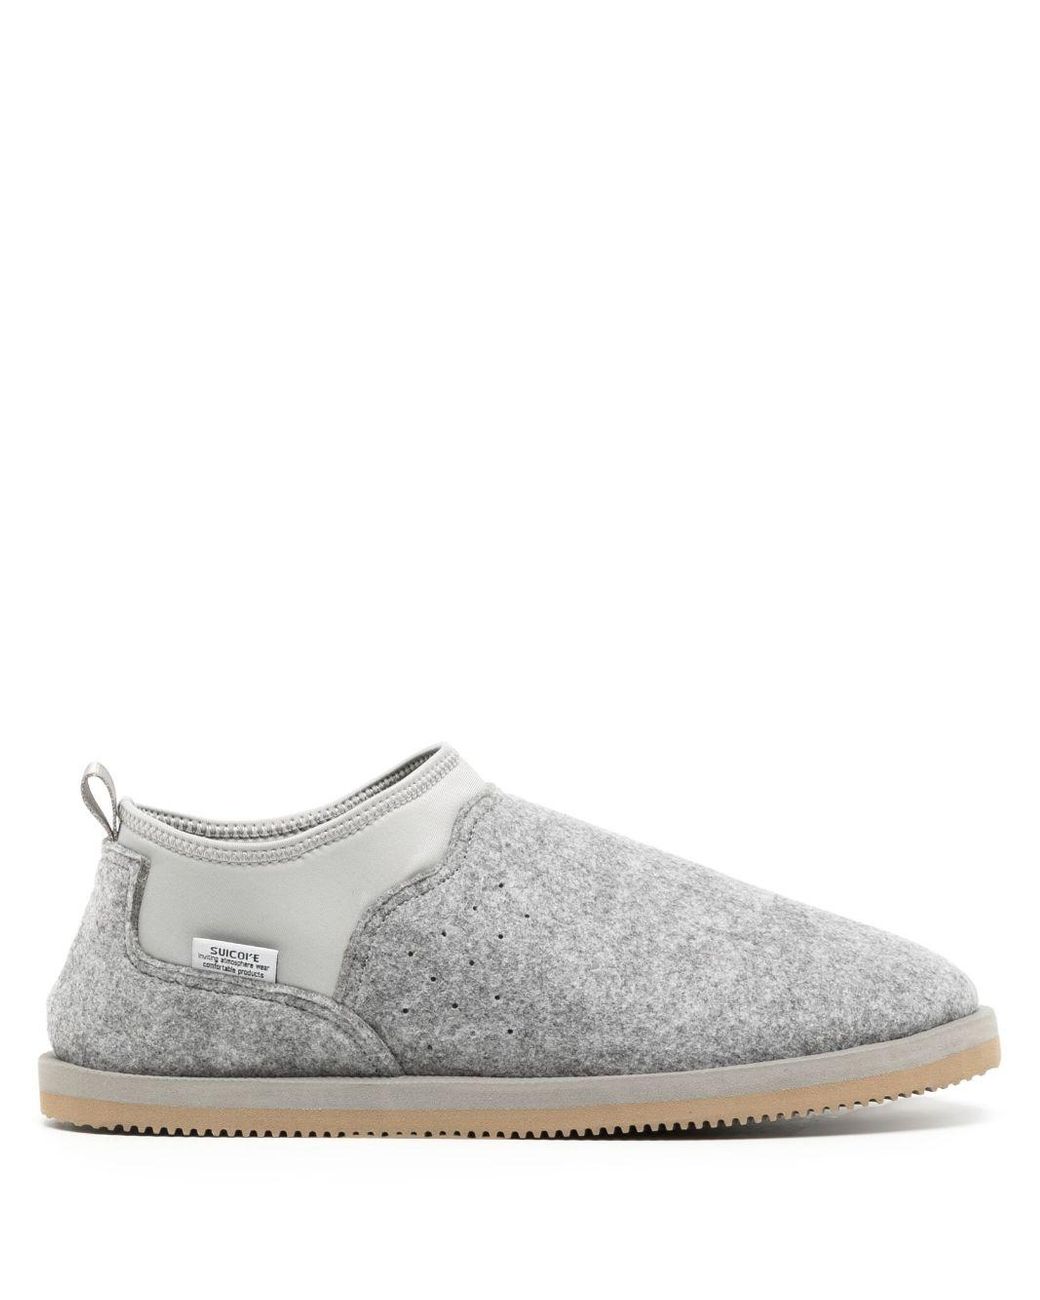 Suicoke Ron-feab Slip-on Boots in Gray | Lyst